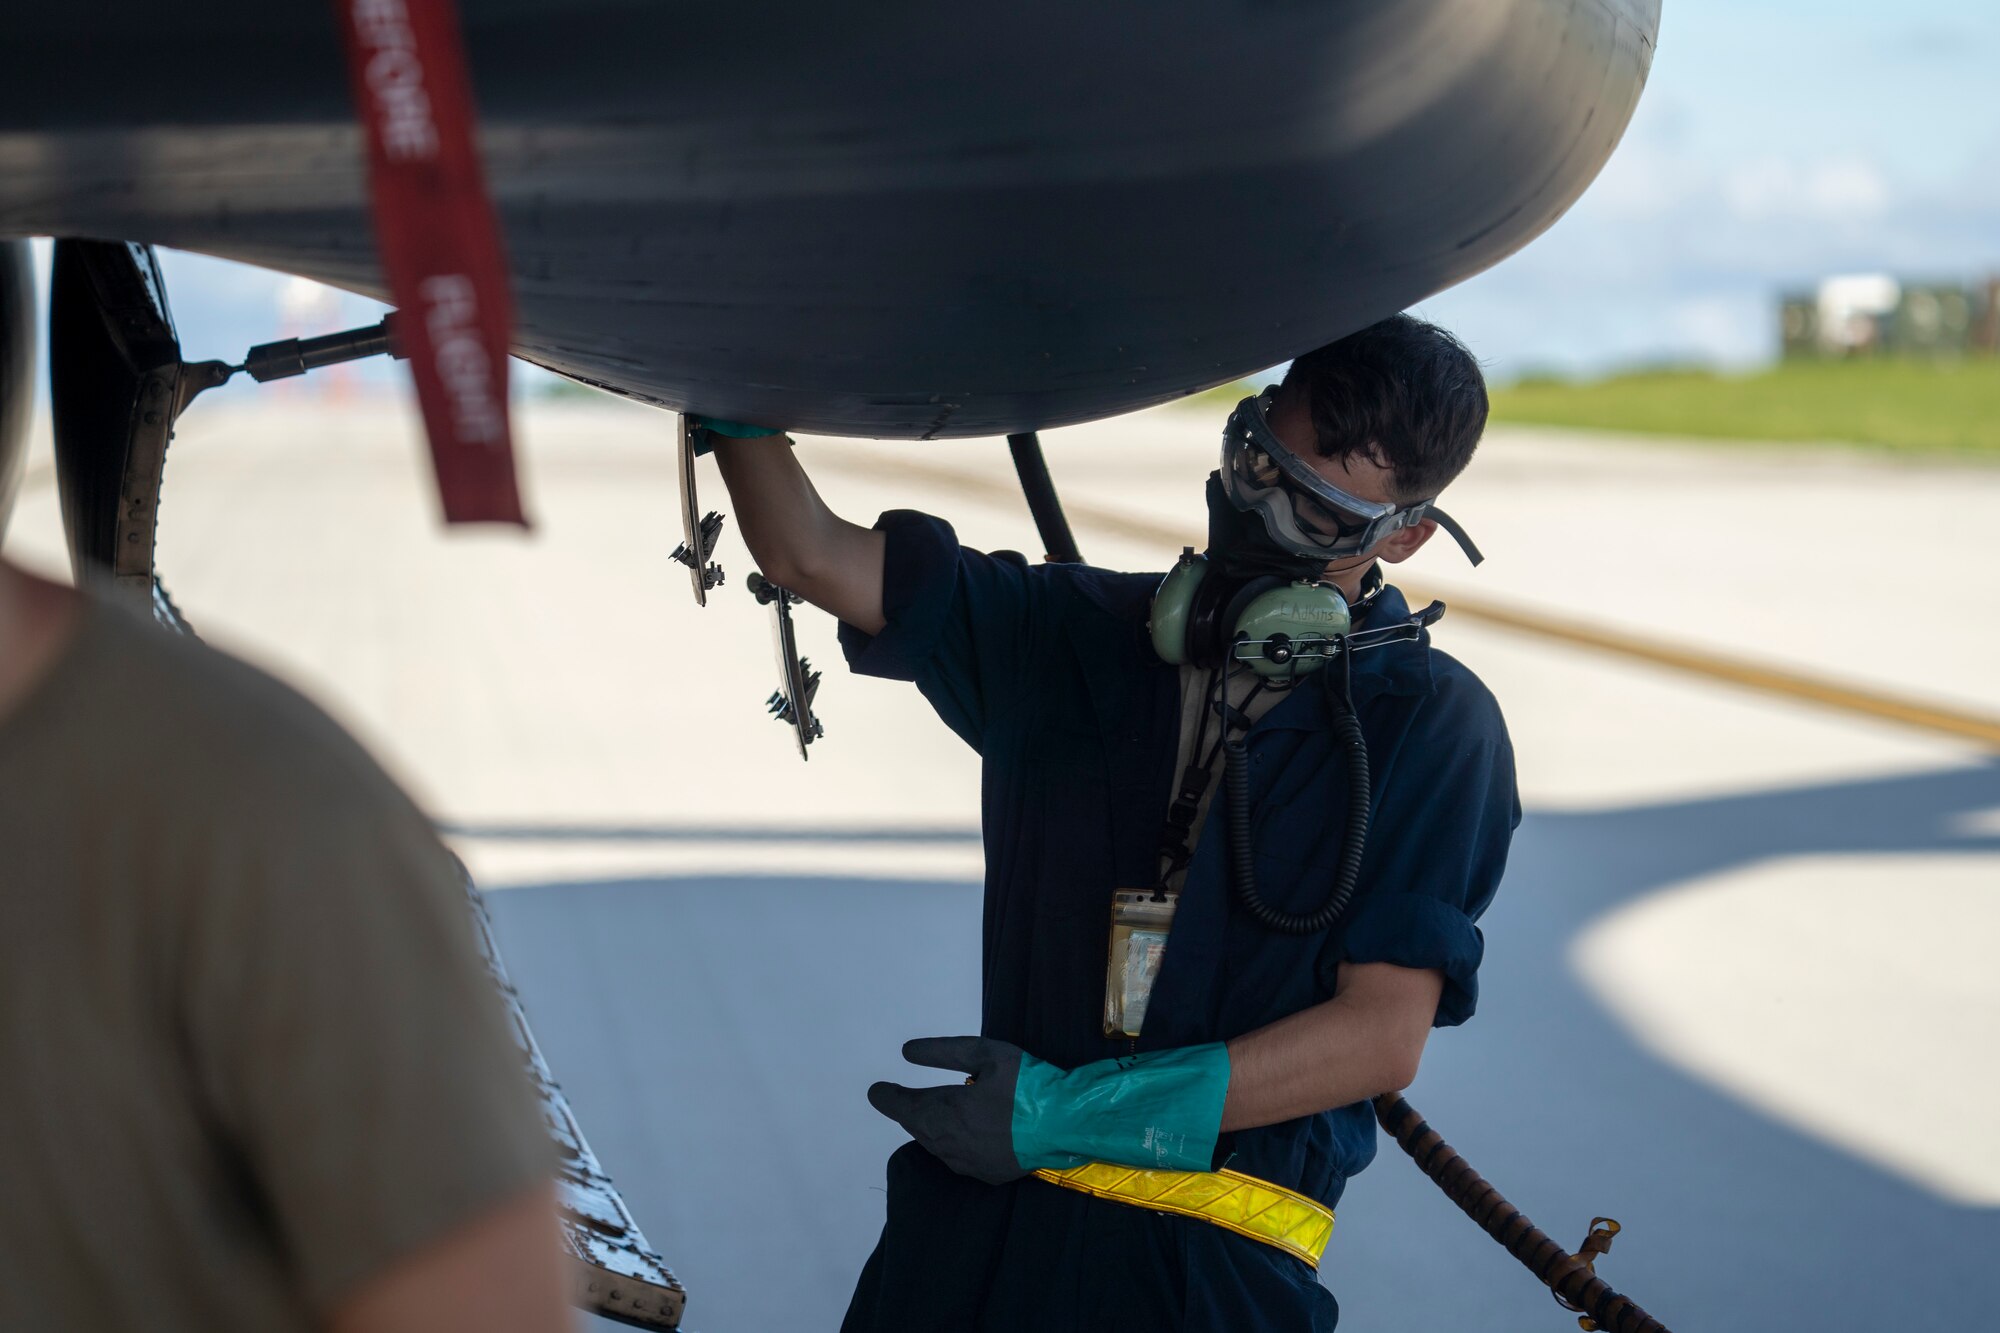 A maintainer assigned to the 34th Expeditionary Bomb Squadron conducts post-flight maintenance after a B-1B Lancer arrives at Andersen AFB, Guam, Sept. 10, 2020. Approximately 200 Airmen and four B-1s assigned to the 28th Bomb Wing at Ellsworth AFB, South Dakota, deployed to the Pacific in support of the Bomber Task Force employment model. The BTF is deployed to Andersen AFB to support Pacific Air Forces’ training efforts with allies, partners and joint forces; and strategic deterrence missions to reinforce the rules-based order in the Indo-Pacific region. (U.S. Air Force photo by 1st Lt. Joshua Sinclair)